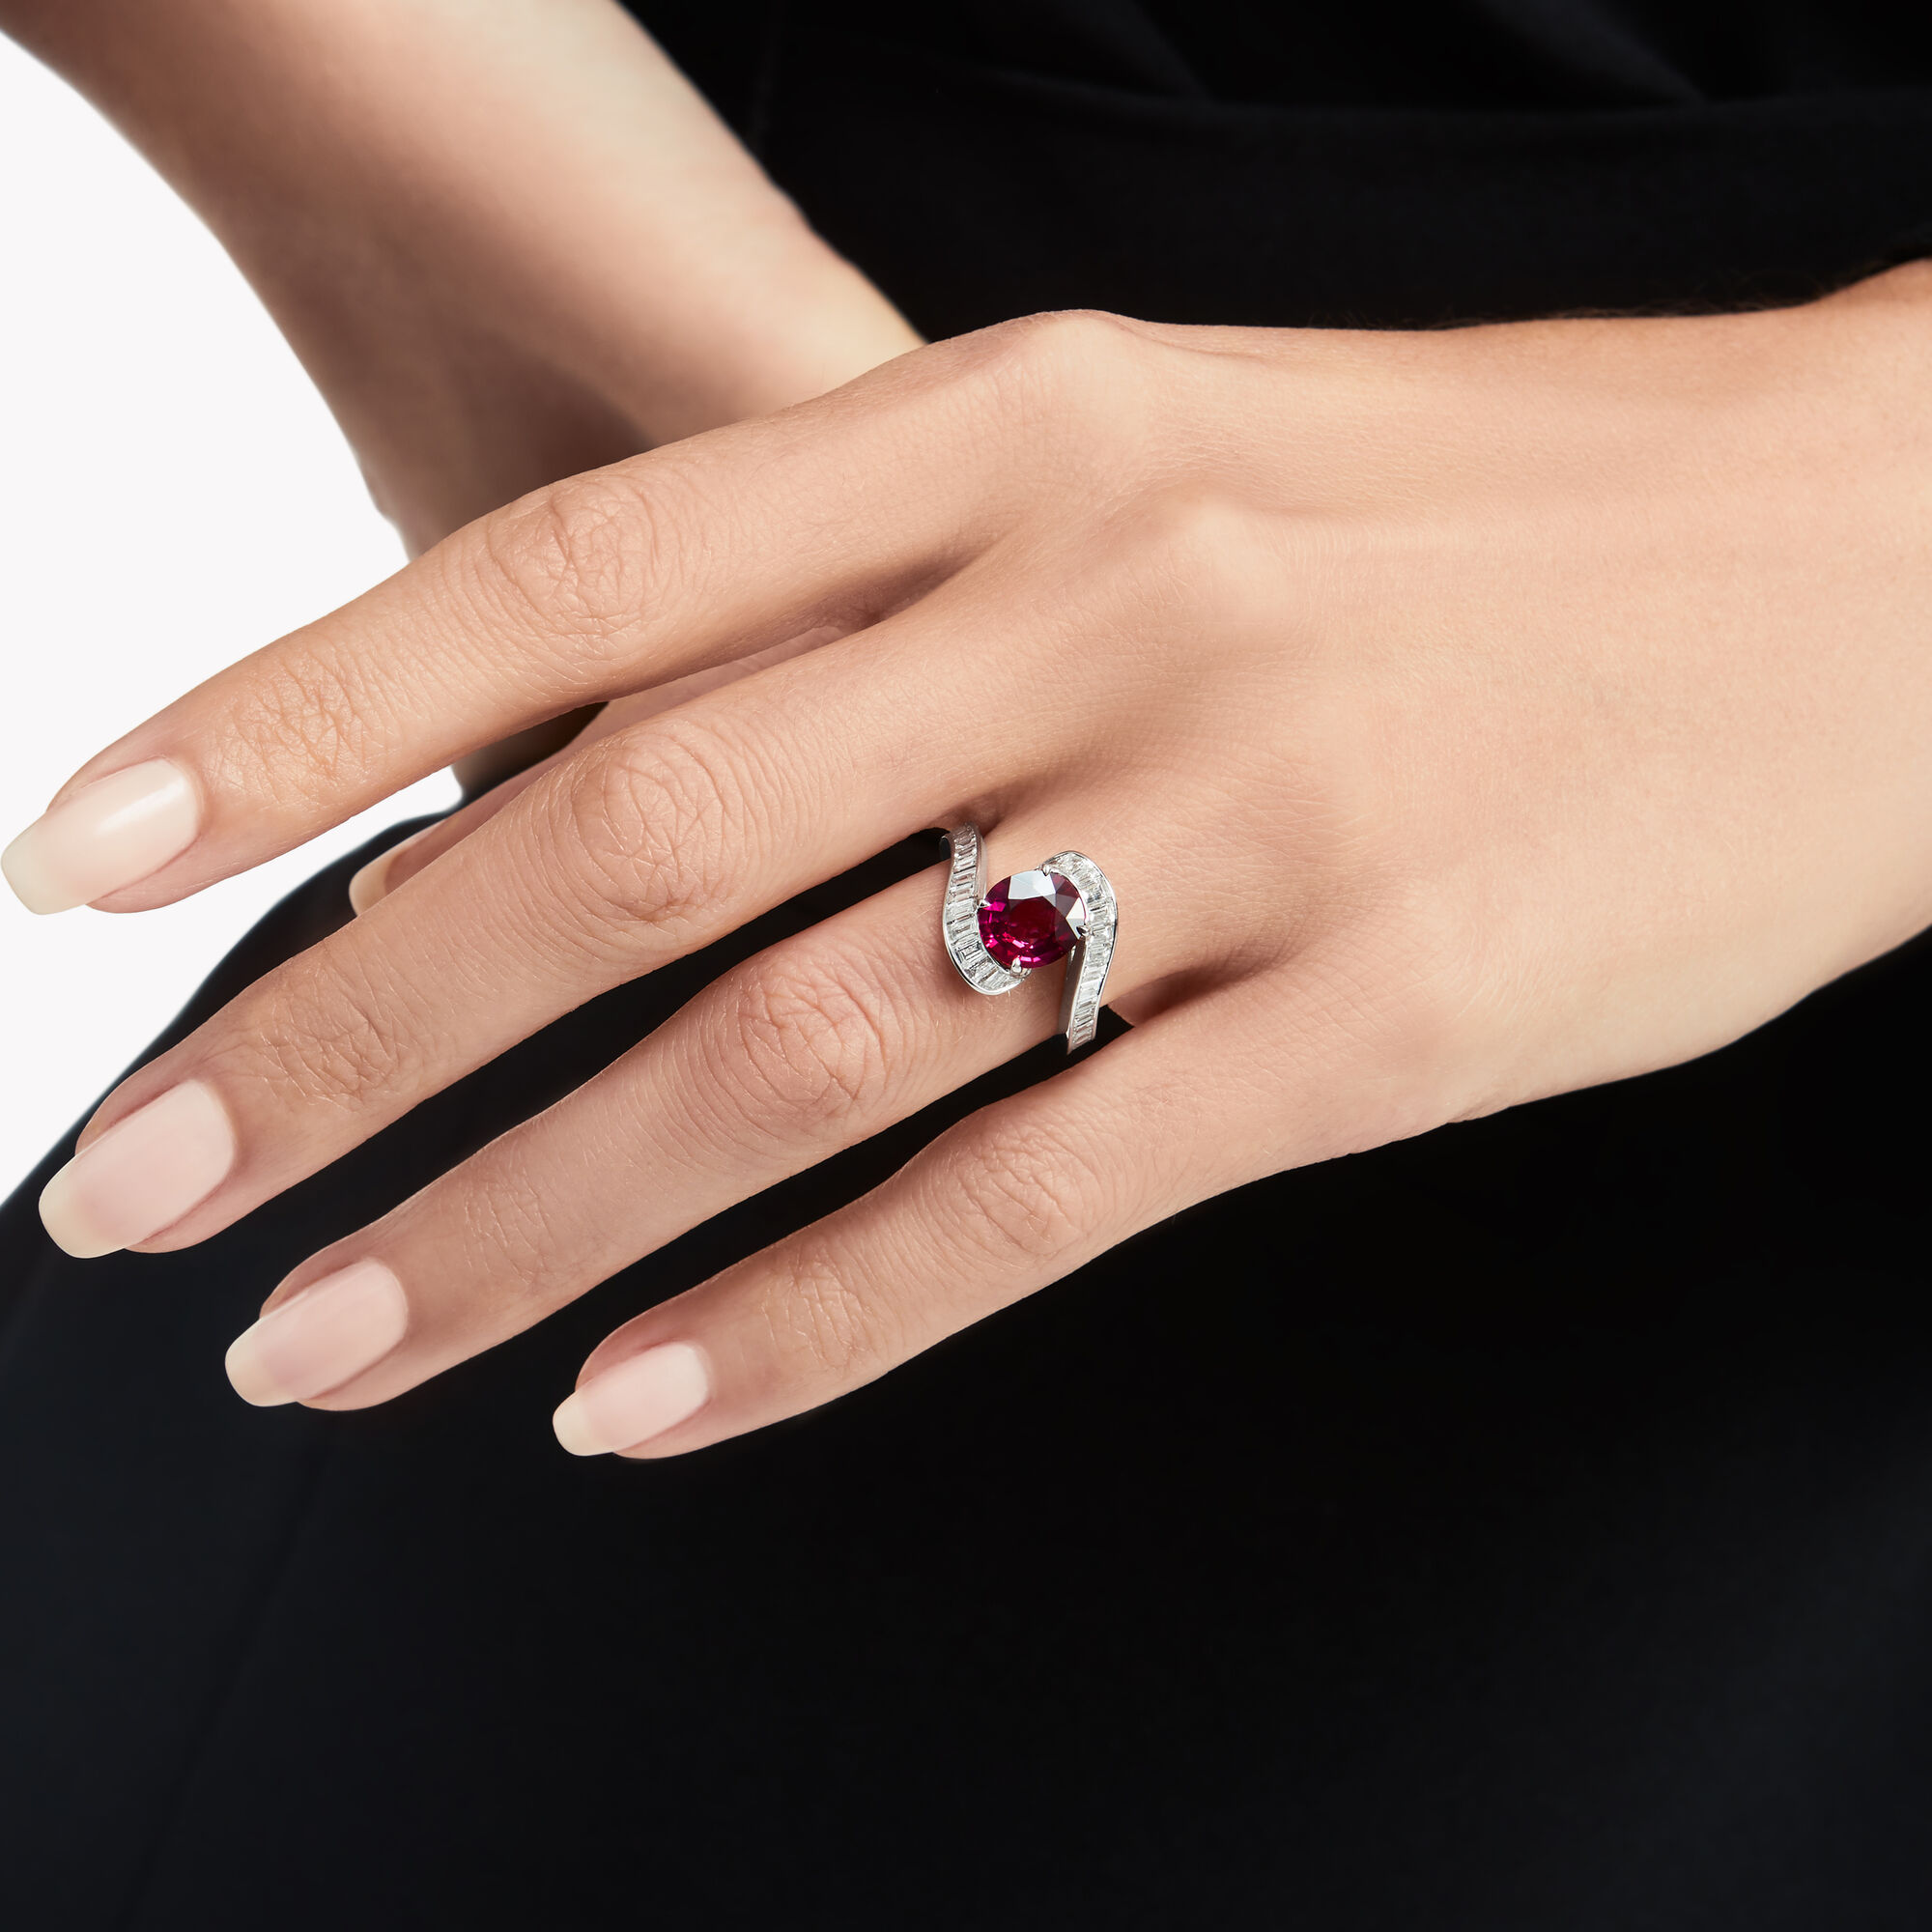 Oval Ruby High Jewellery Ring 2.08 CT OVAL BURMESE RUBY